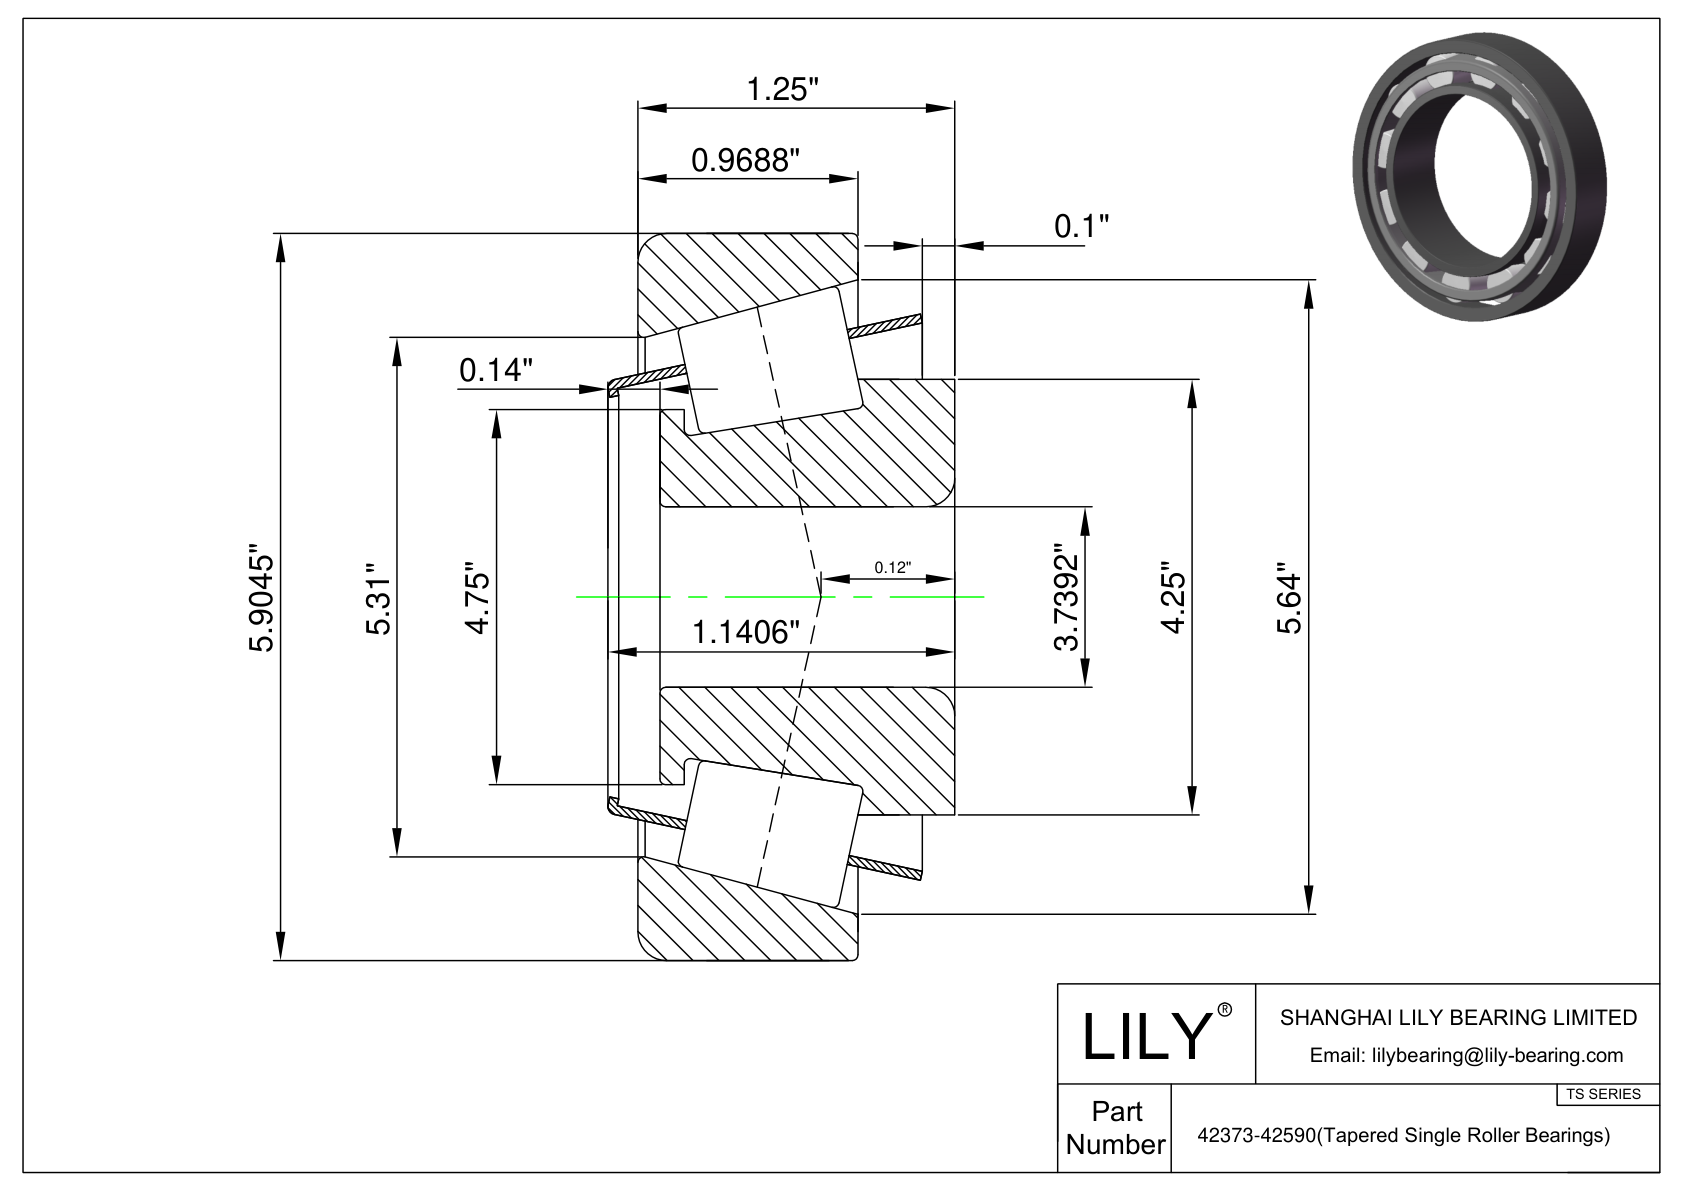 42373-42590 TS (Tapered Single Roller Bearings) (Imperial) cad drawing